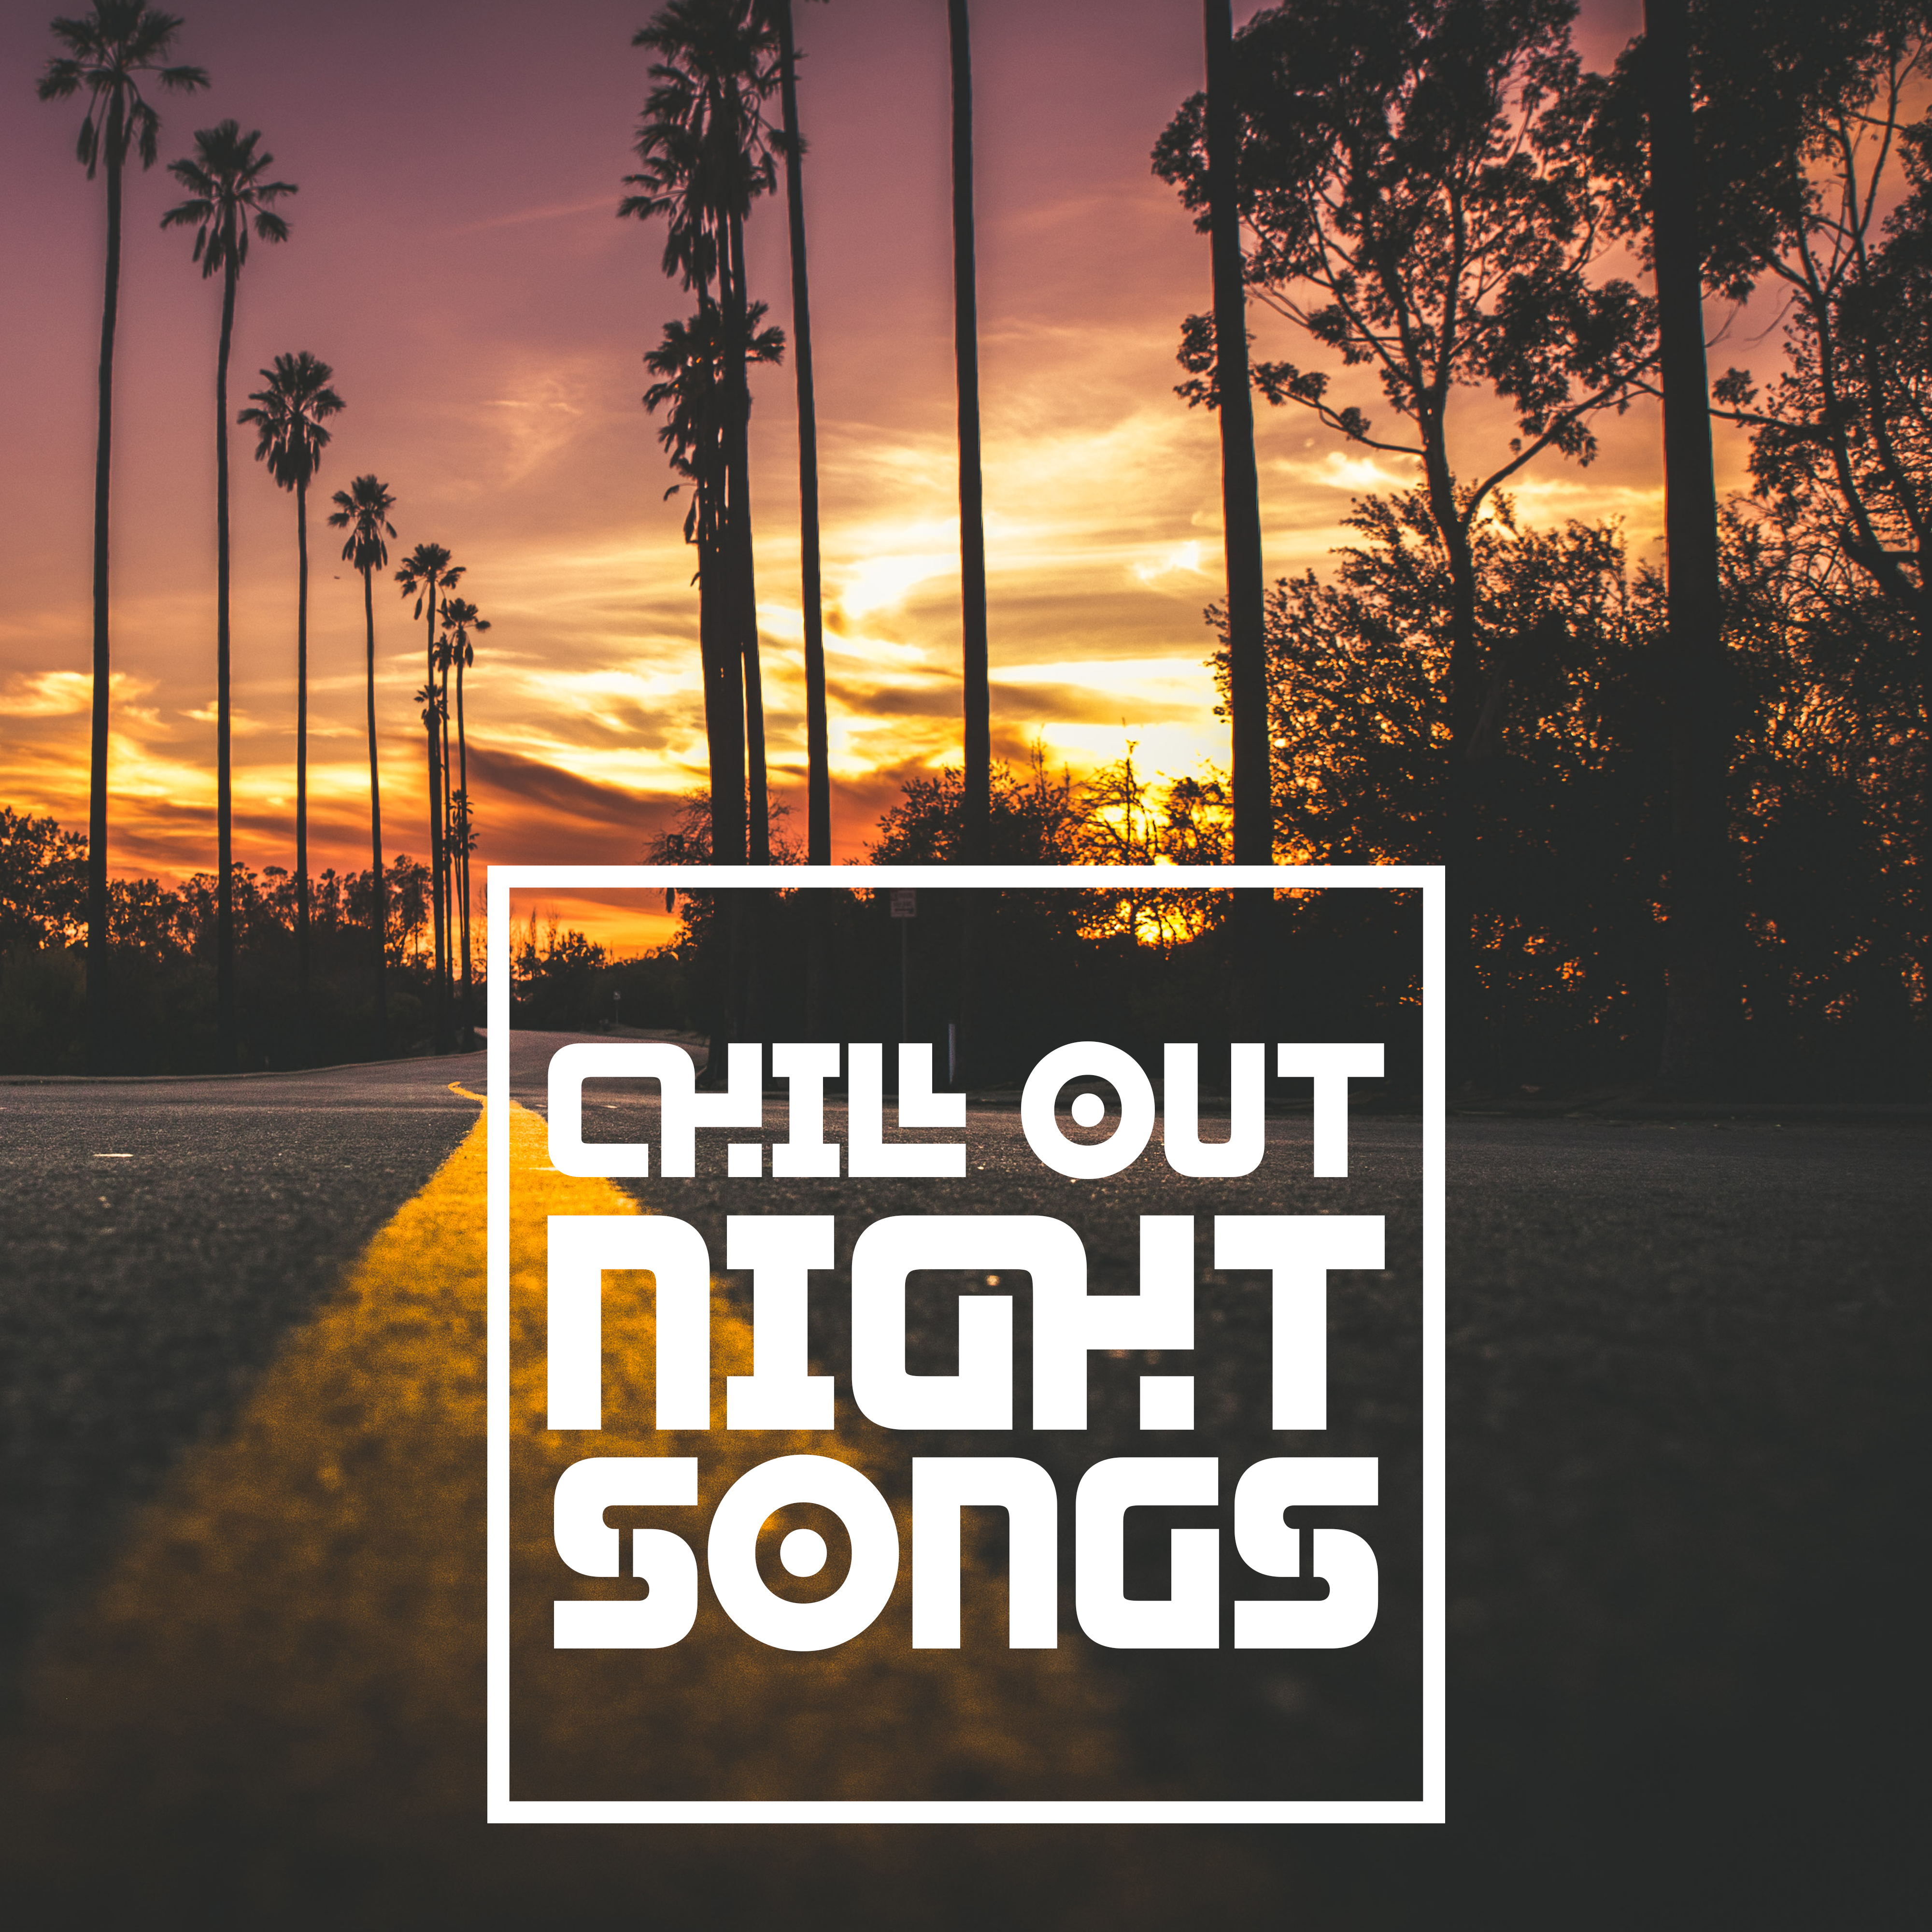 Chill Out Night Songs  Summer Chill Out, Evening Peaceful Music, Relaxing Melodies